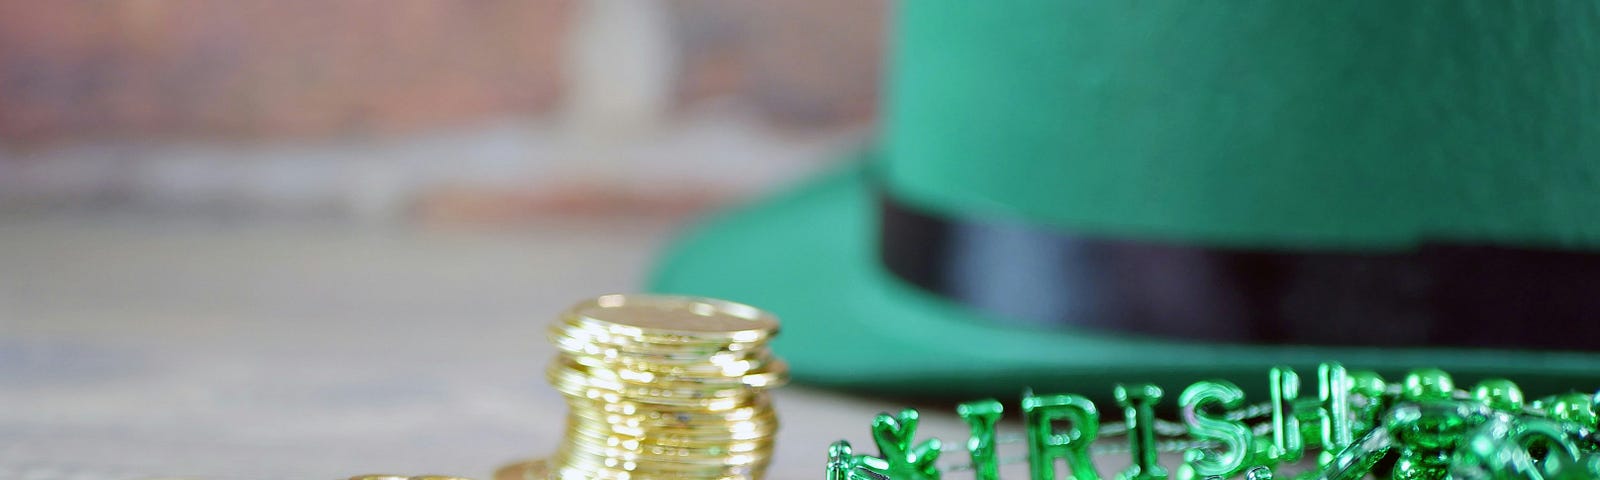 Green felt hat, shamrock necklace, and plastic gold coins on a table top.